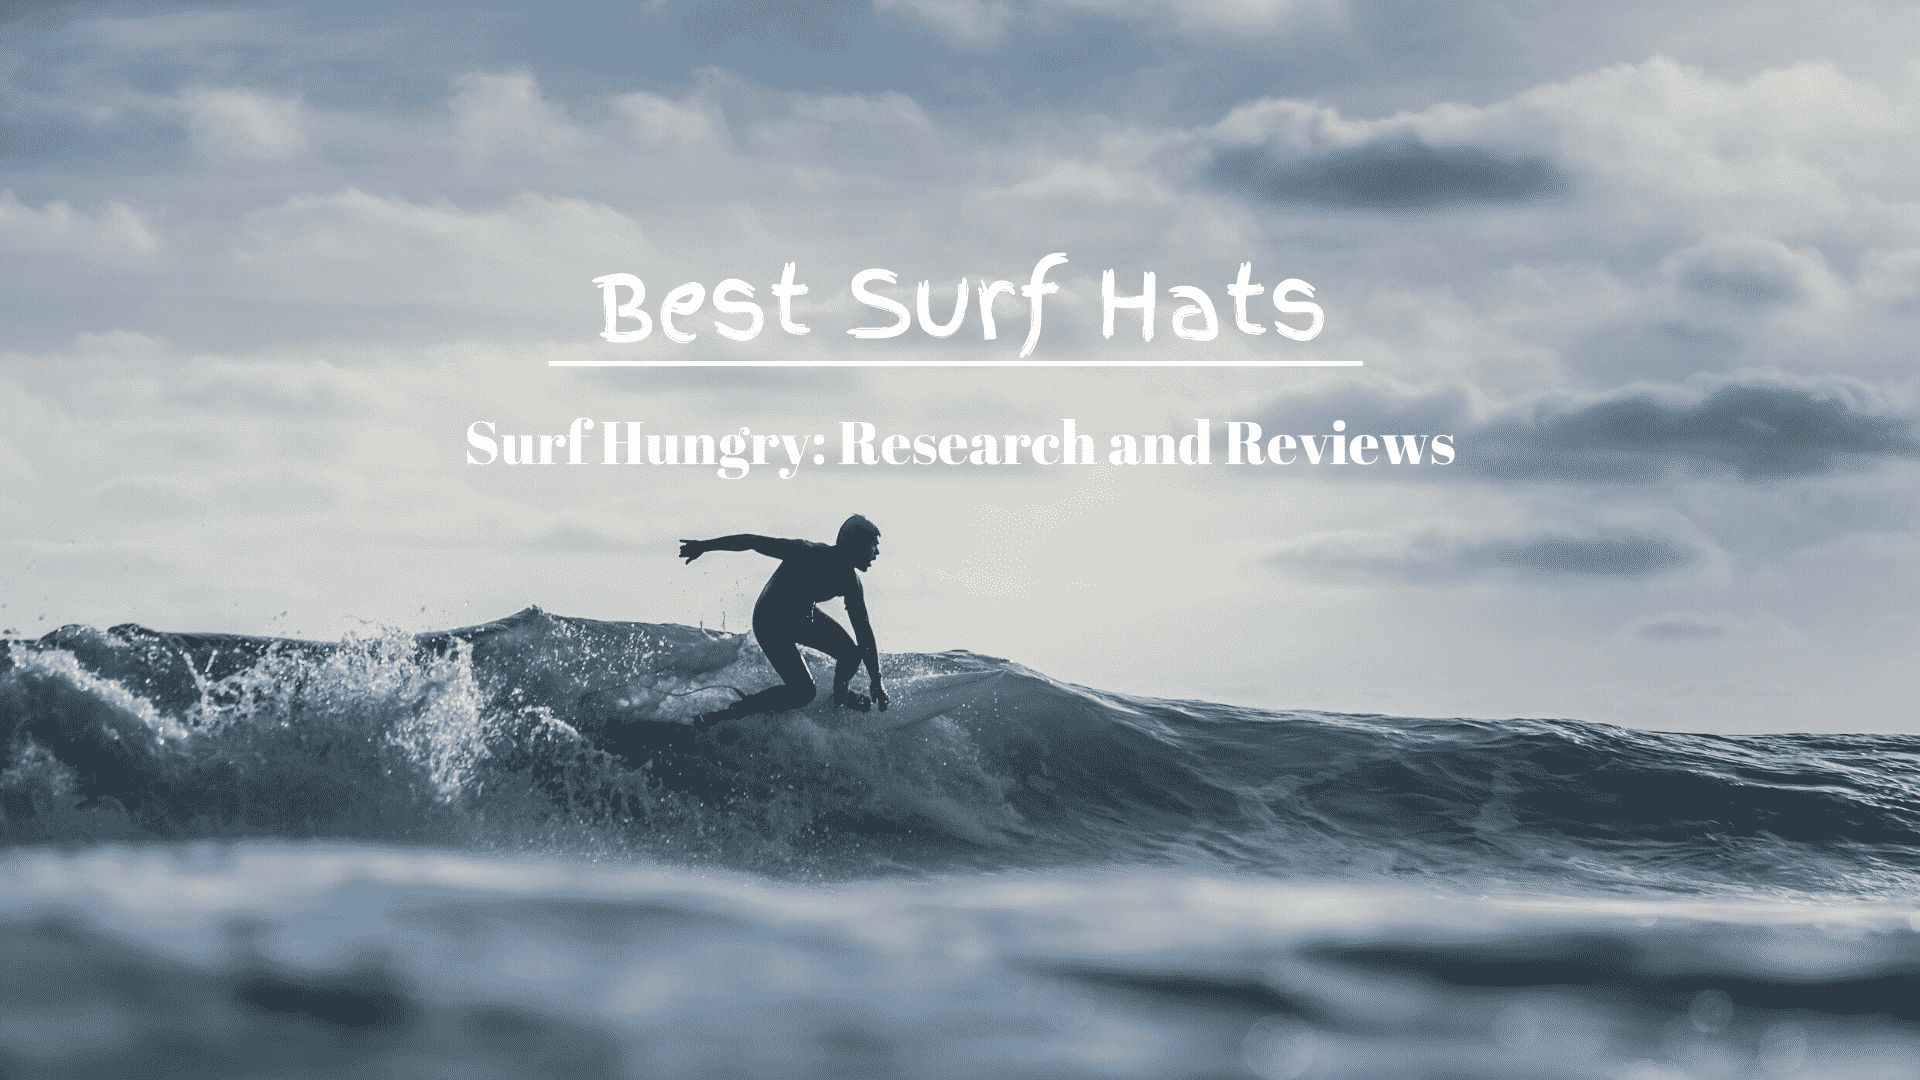 How do you surf with a hat on?